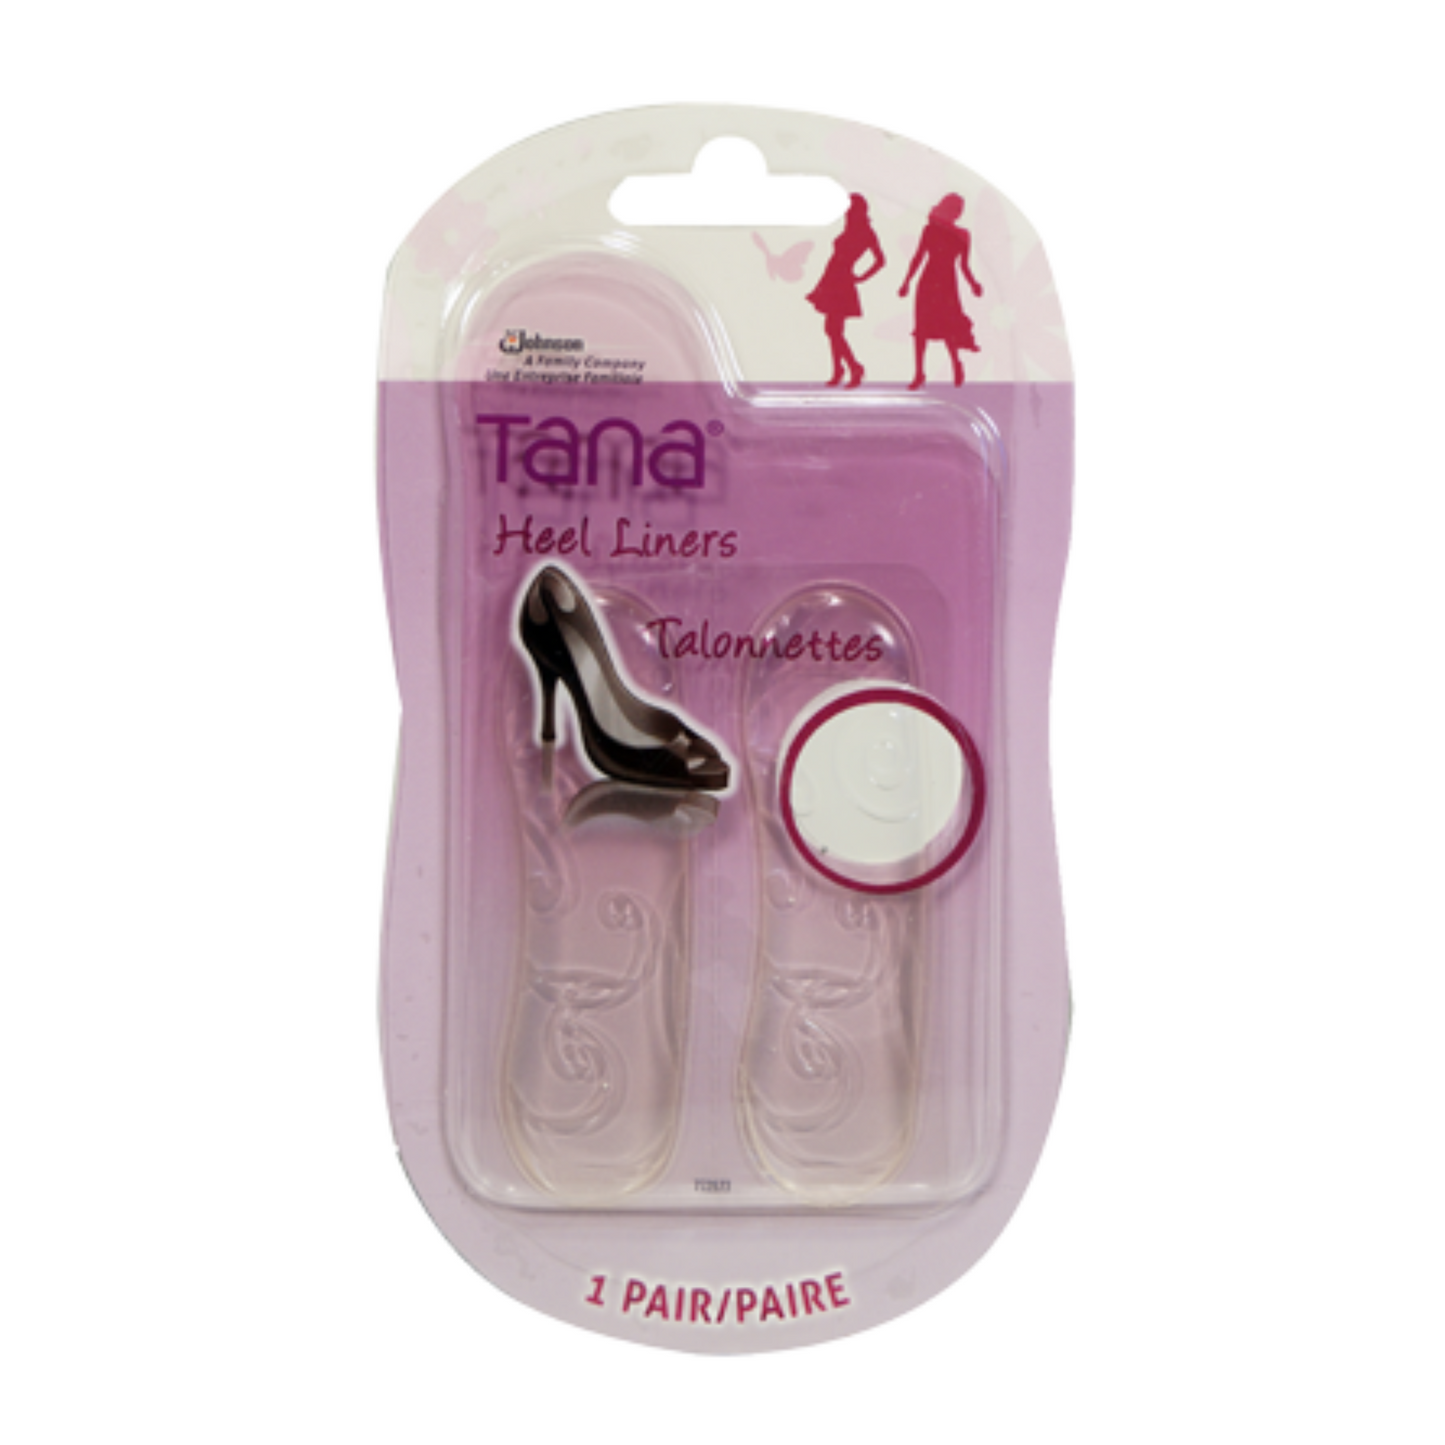 The front face of a box of clear gel heel liners, with a small image of a heeled shoe on it.